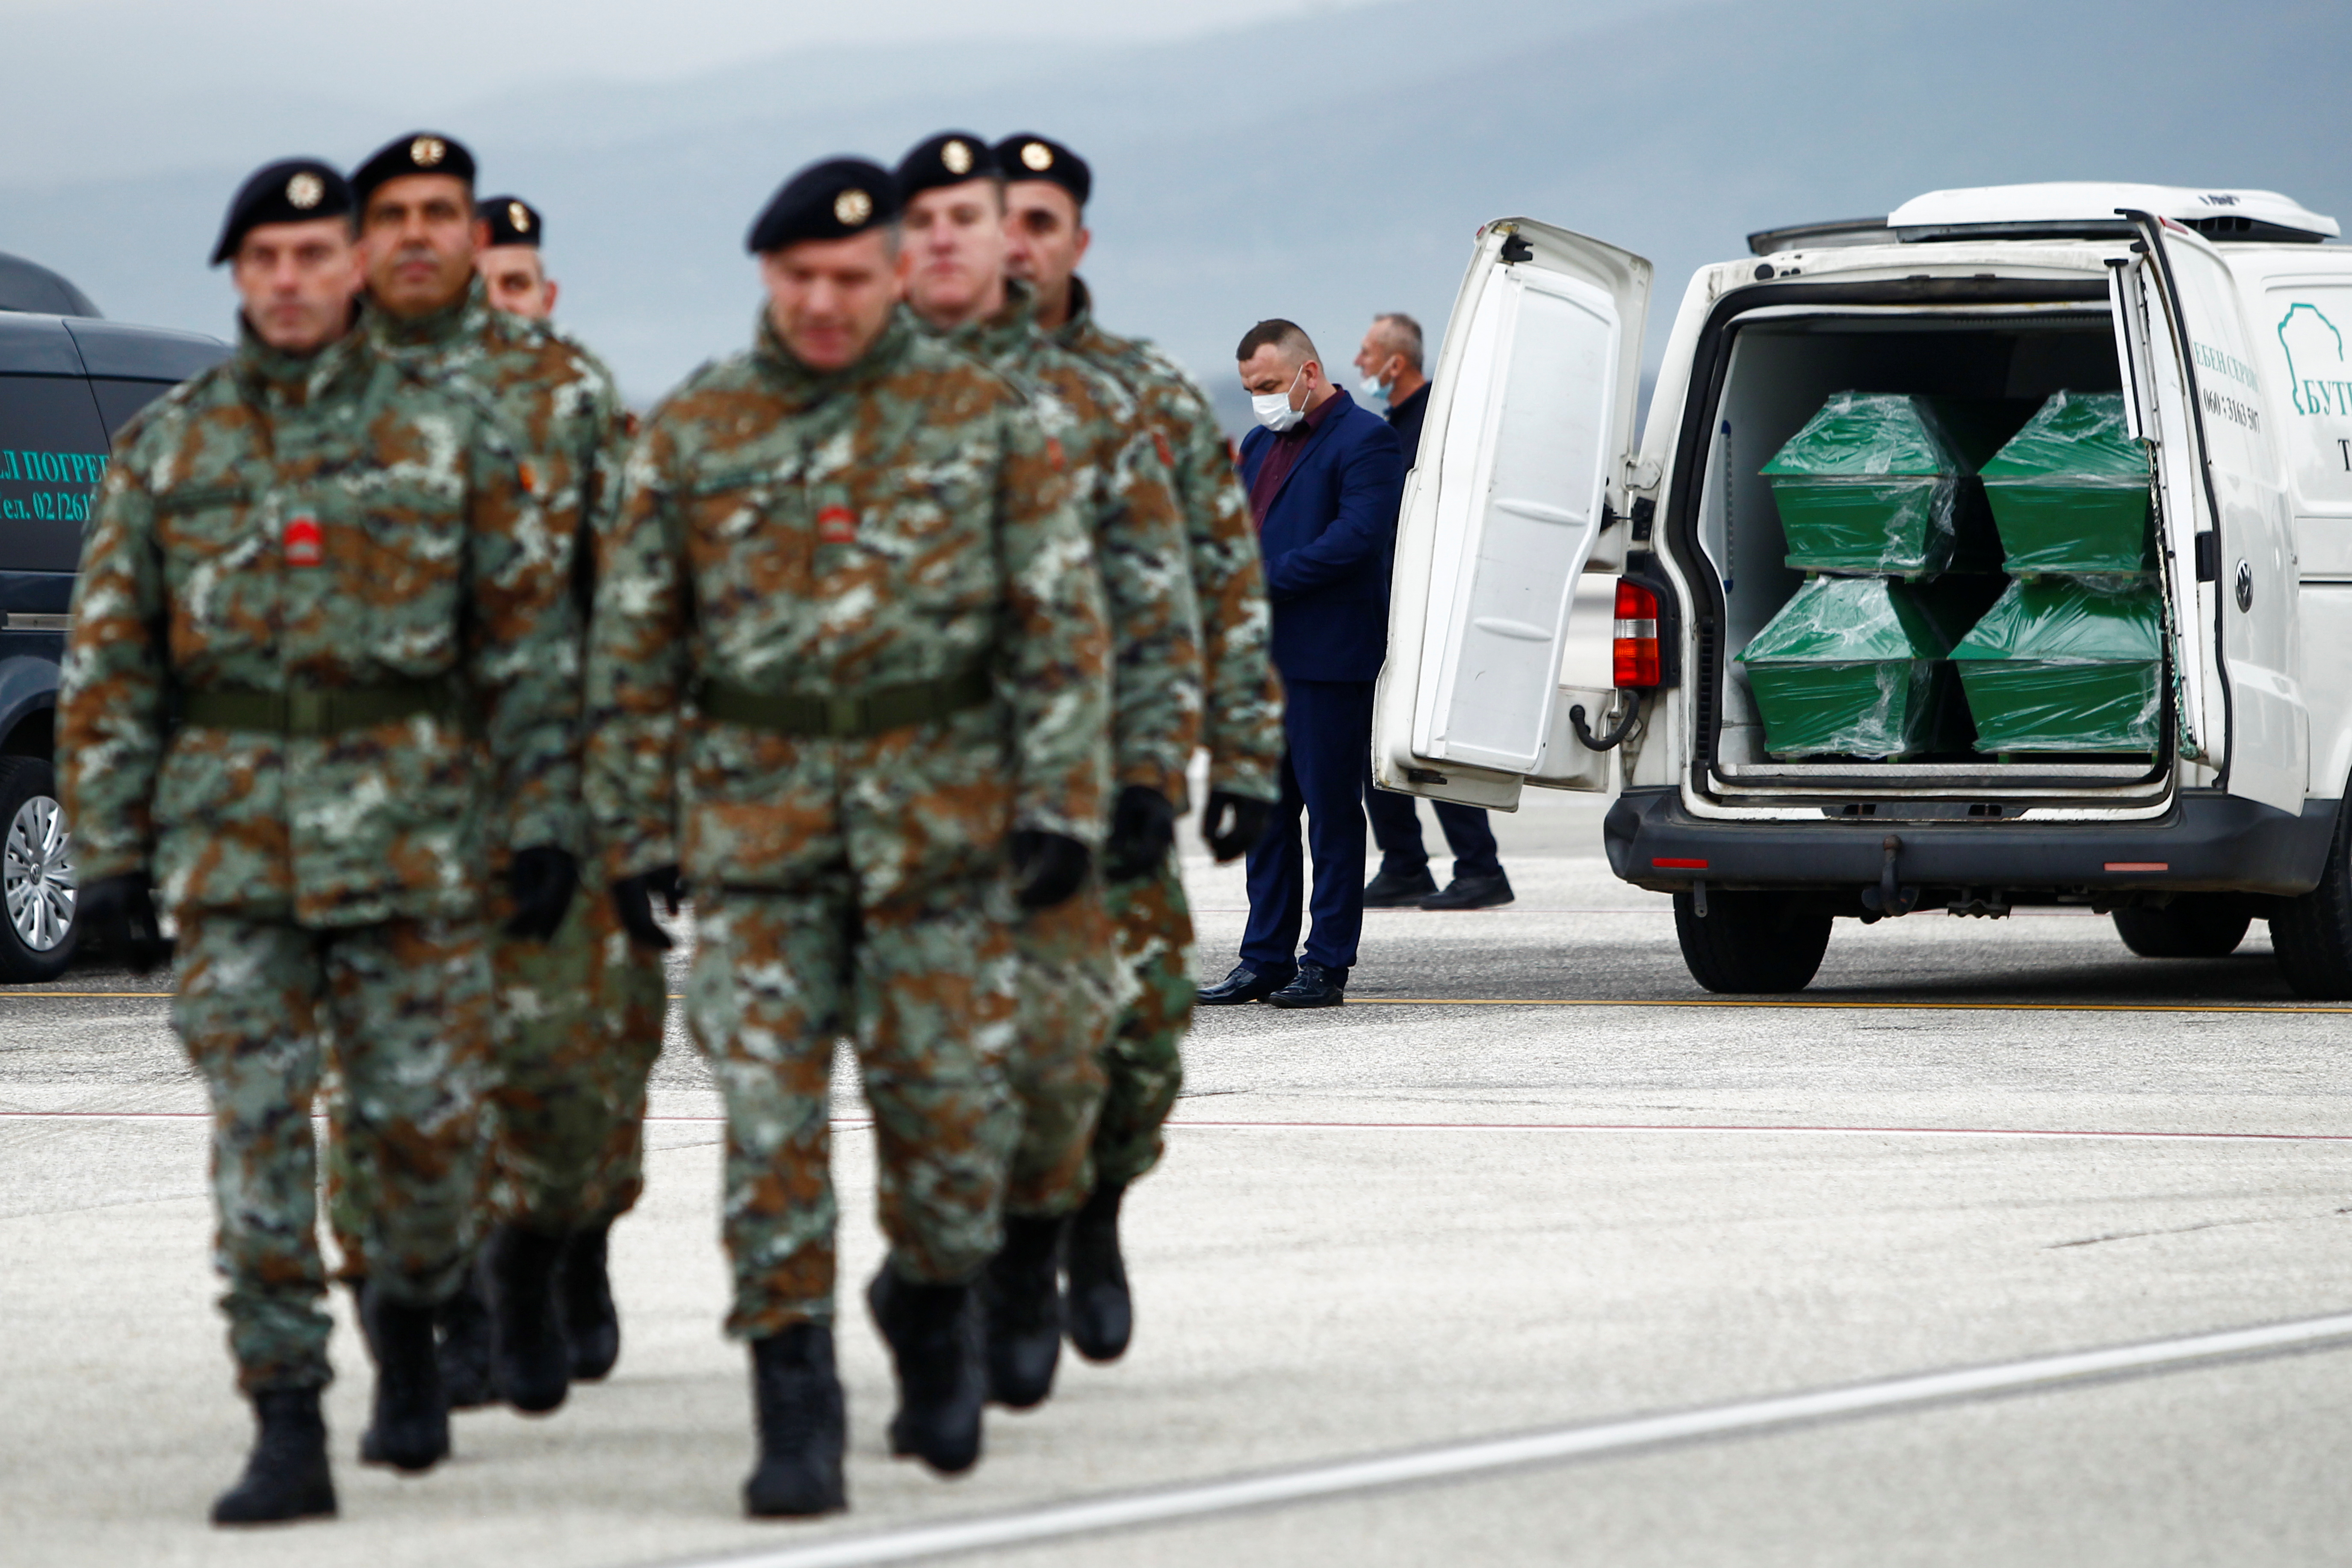 Soldiers walk past as coffins of the victims of last week's deadly bus crash in Bulgaria, sit into a vehicle after their arrival at the Skopje Airport, North Macedonia December 3, 2021. REUTERS/Ognen Teofilovski